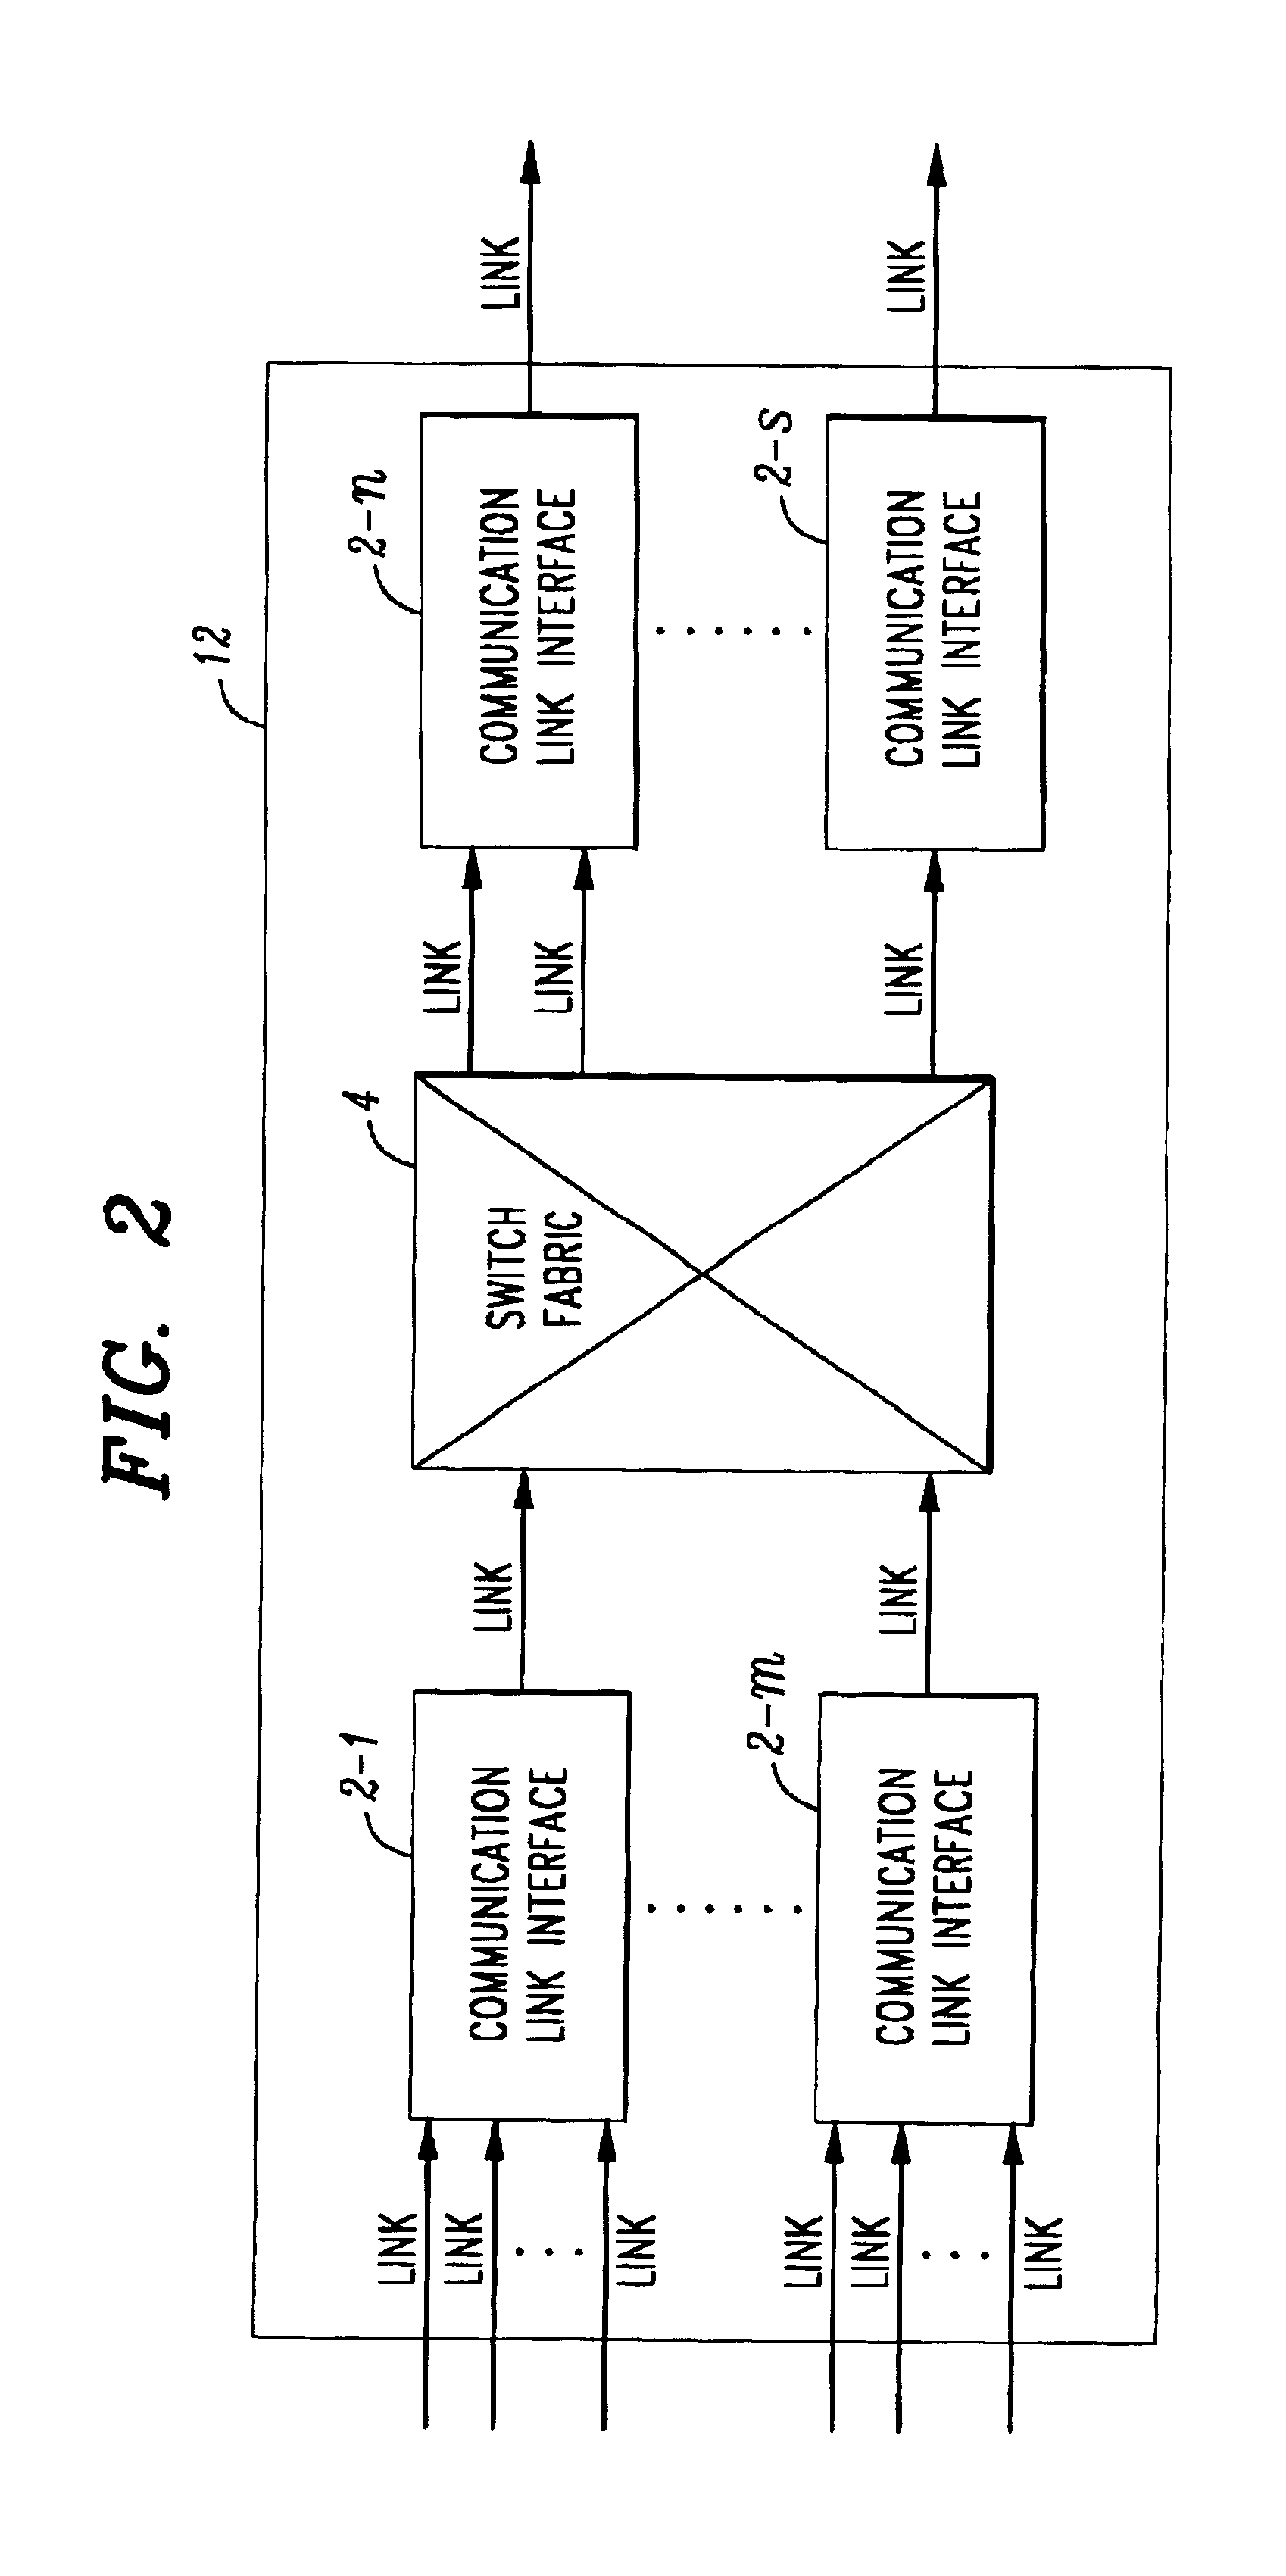 Method and apparatus for guaranteeing data transfer rates and enforcing conformance with traffic profiles in a packet network